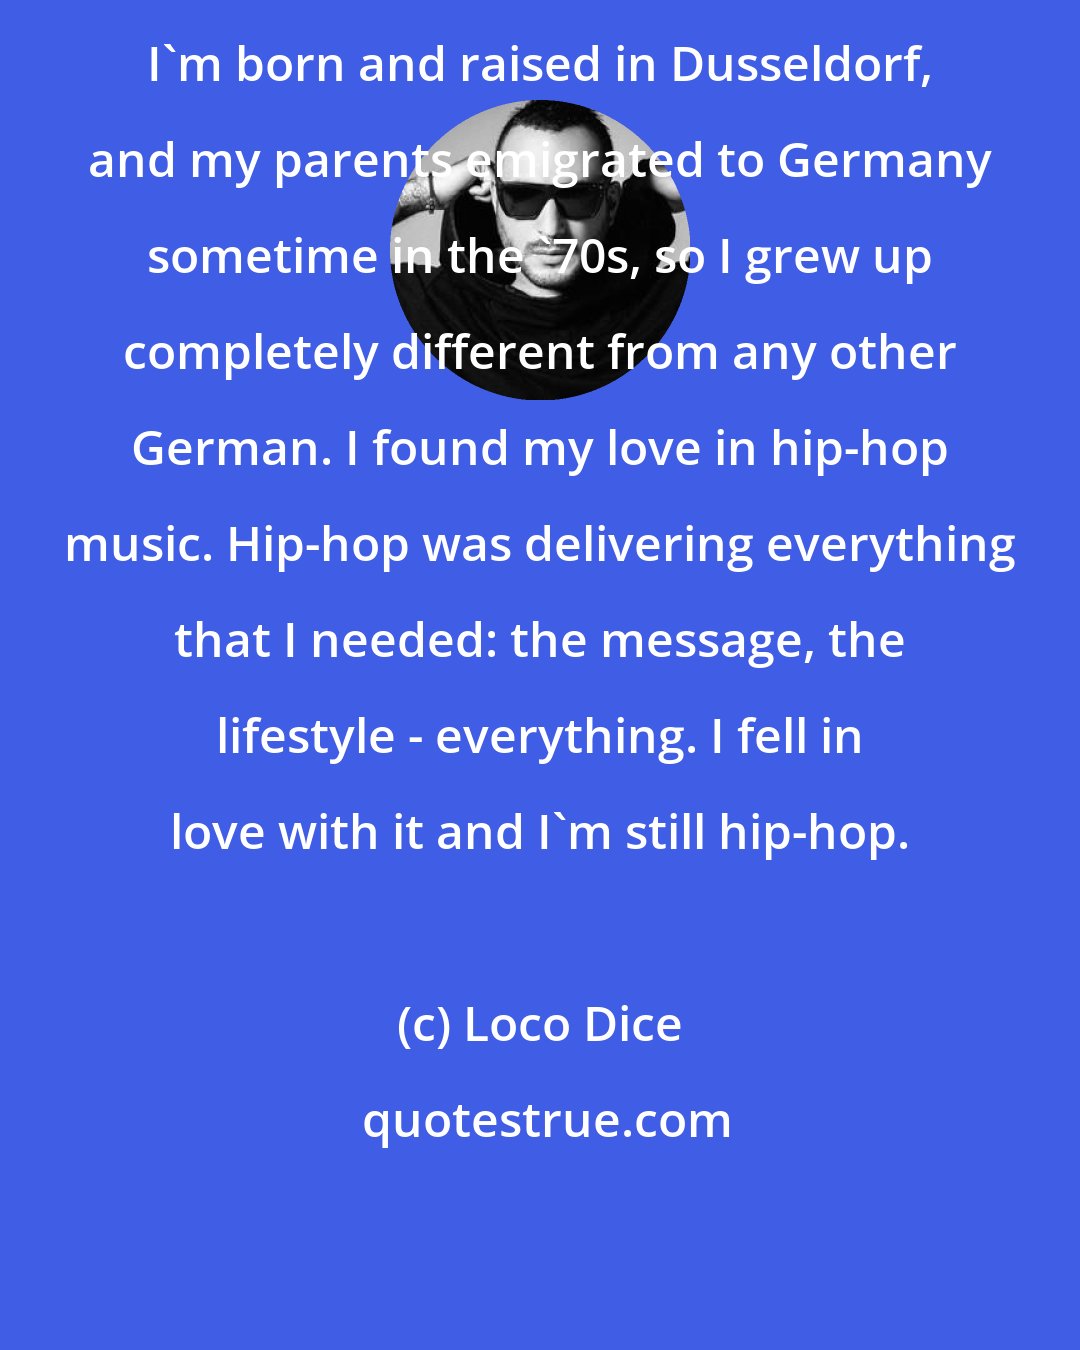 Loco Dice: I'm born and raised in Dusseldorf, and my parents emigrated to Germany sometime in the '70s, so I grew up completely different from any other German. I found my love in hip-hop music. Hip-hop was delivering everything that I needed: the message, the lifestyle - everything. I fell in love with it and I'm still hip-hop.